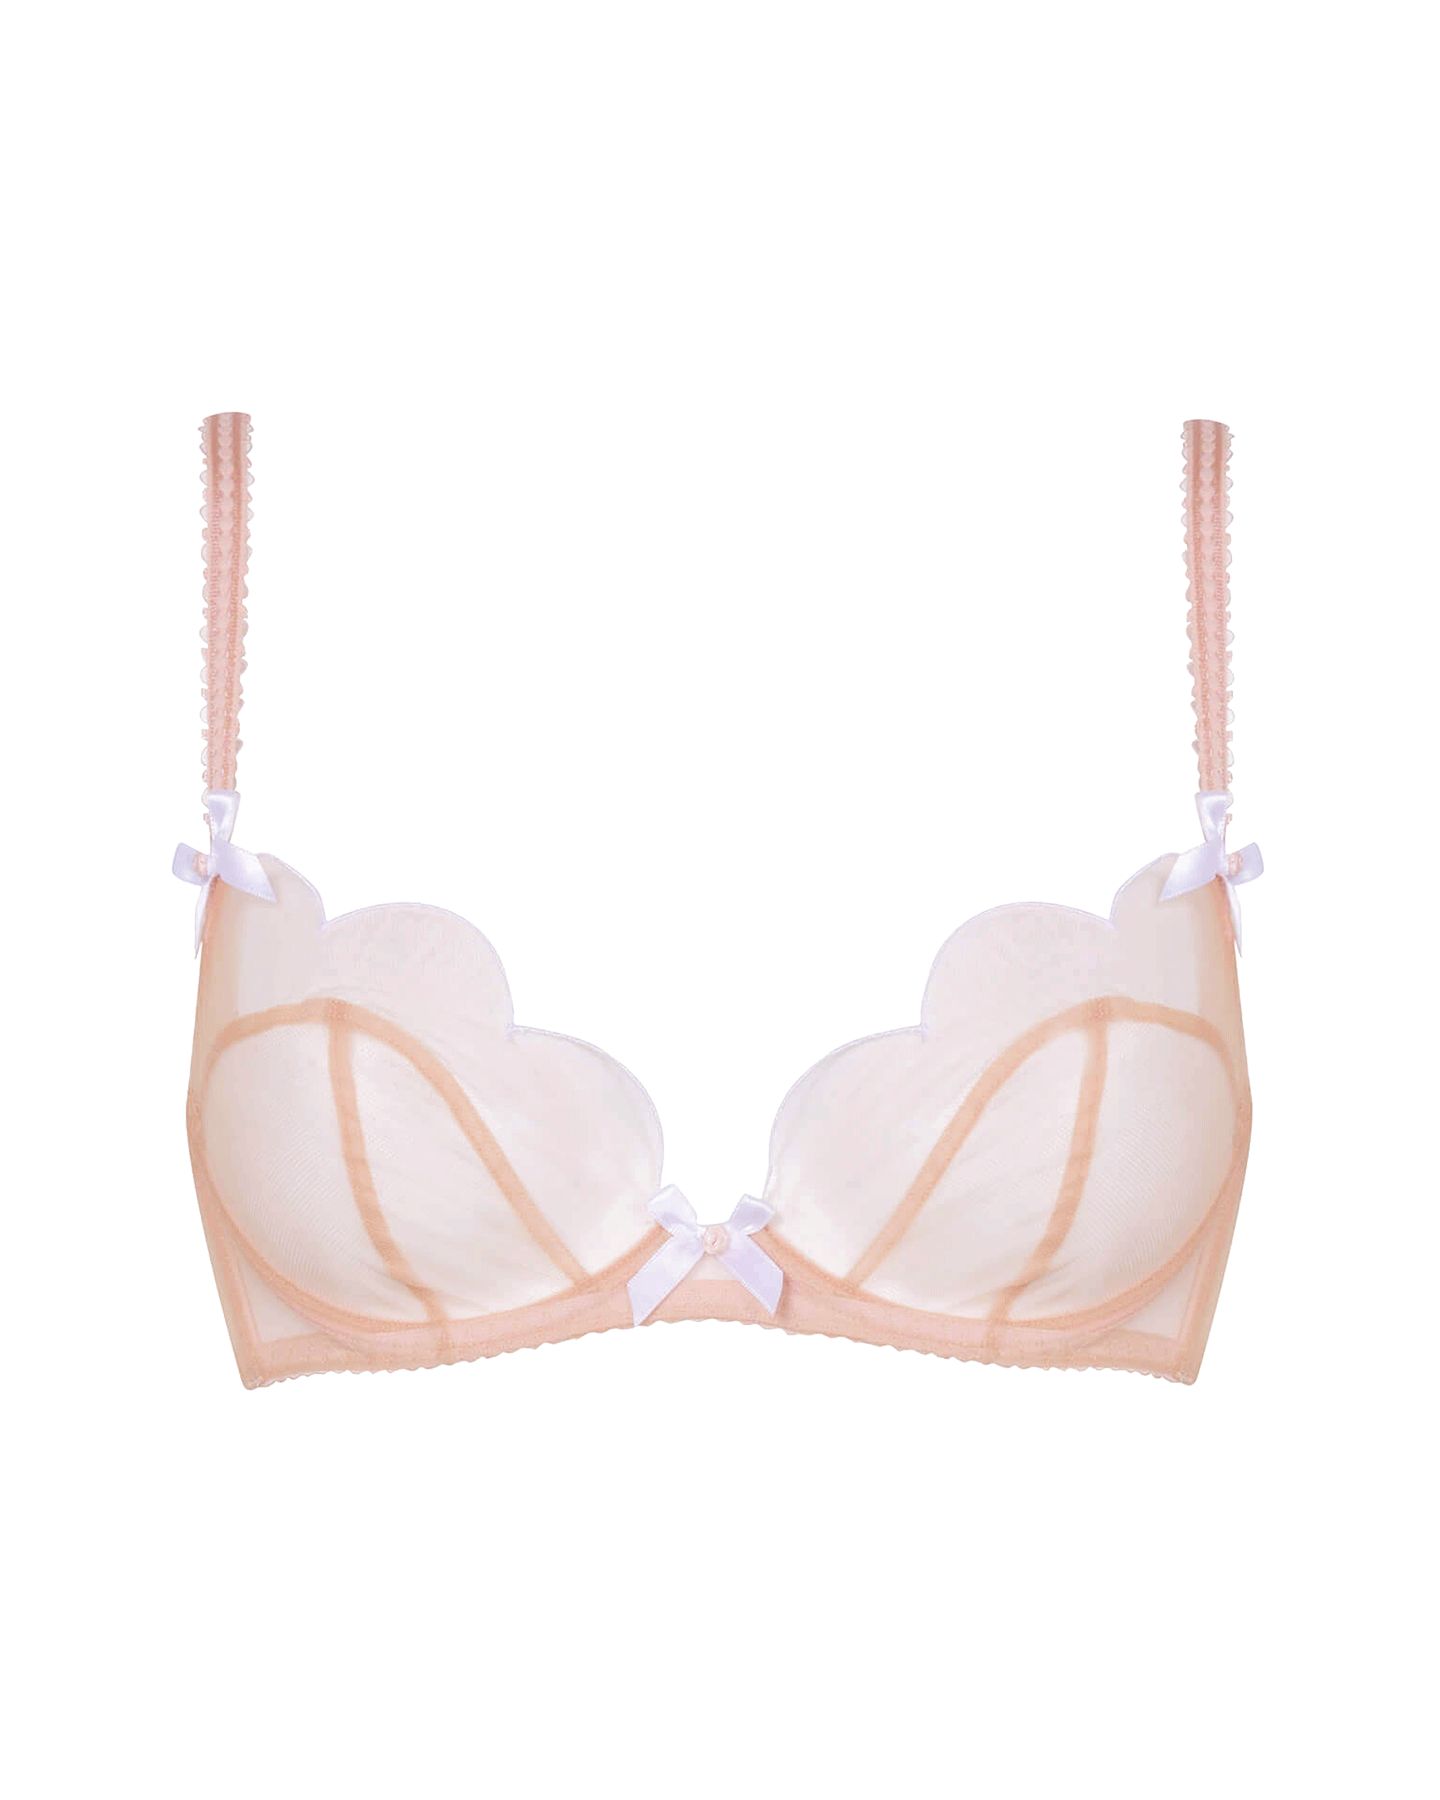 Lorna Plunge Underwired Bra in Sand | Agent Provocateur All Lingerie | Agent Provocateur (US)